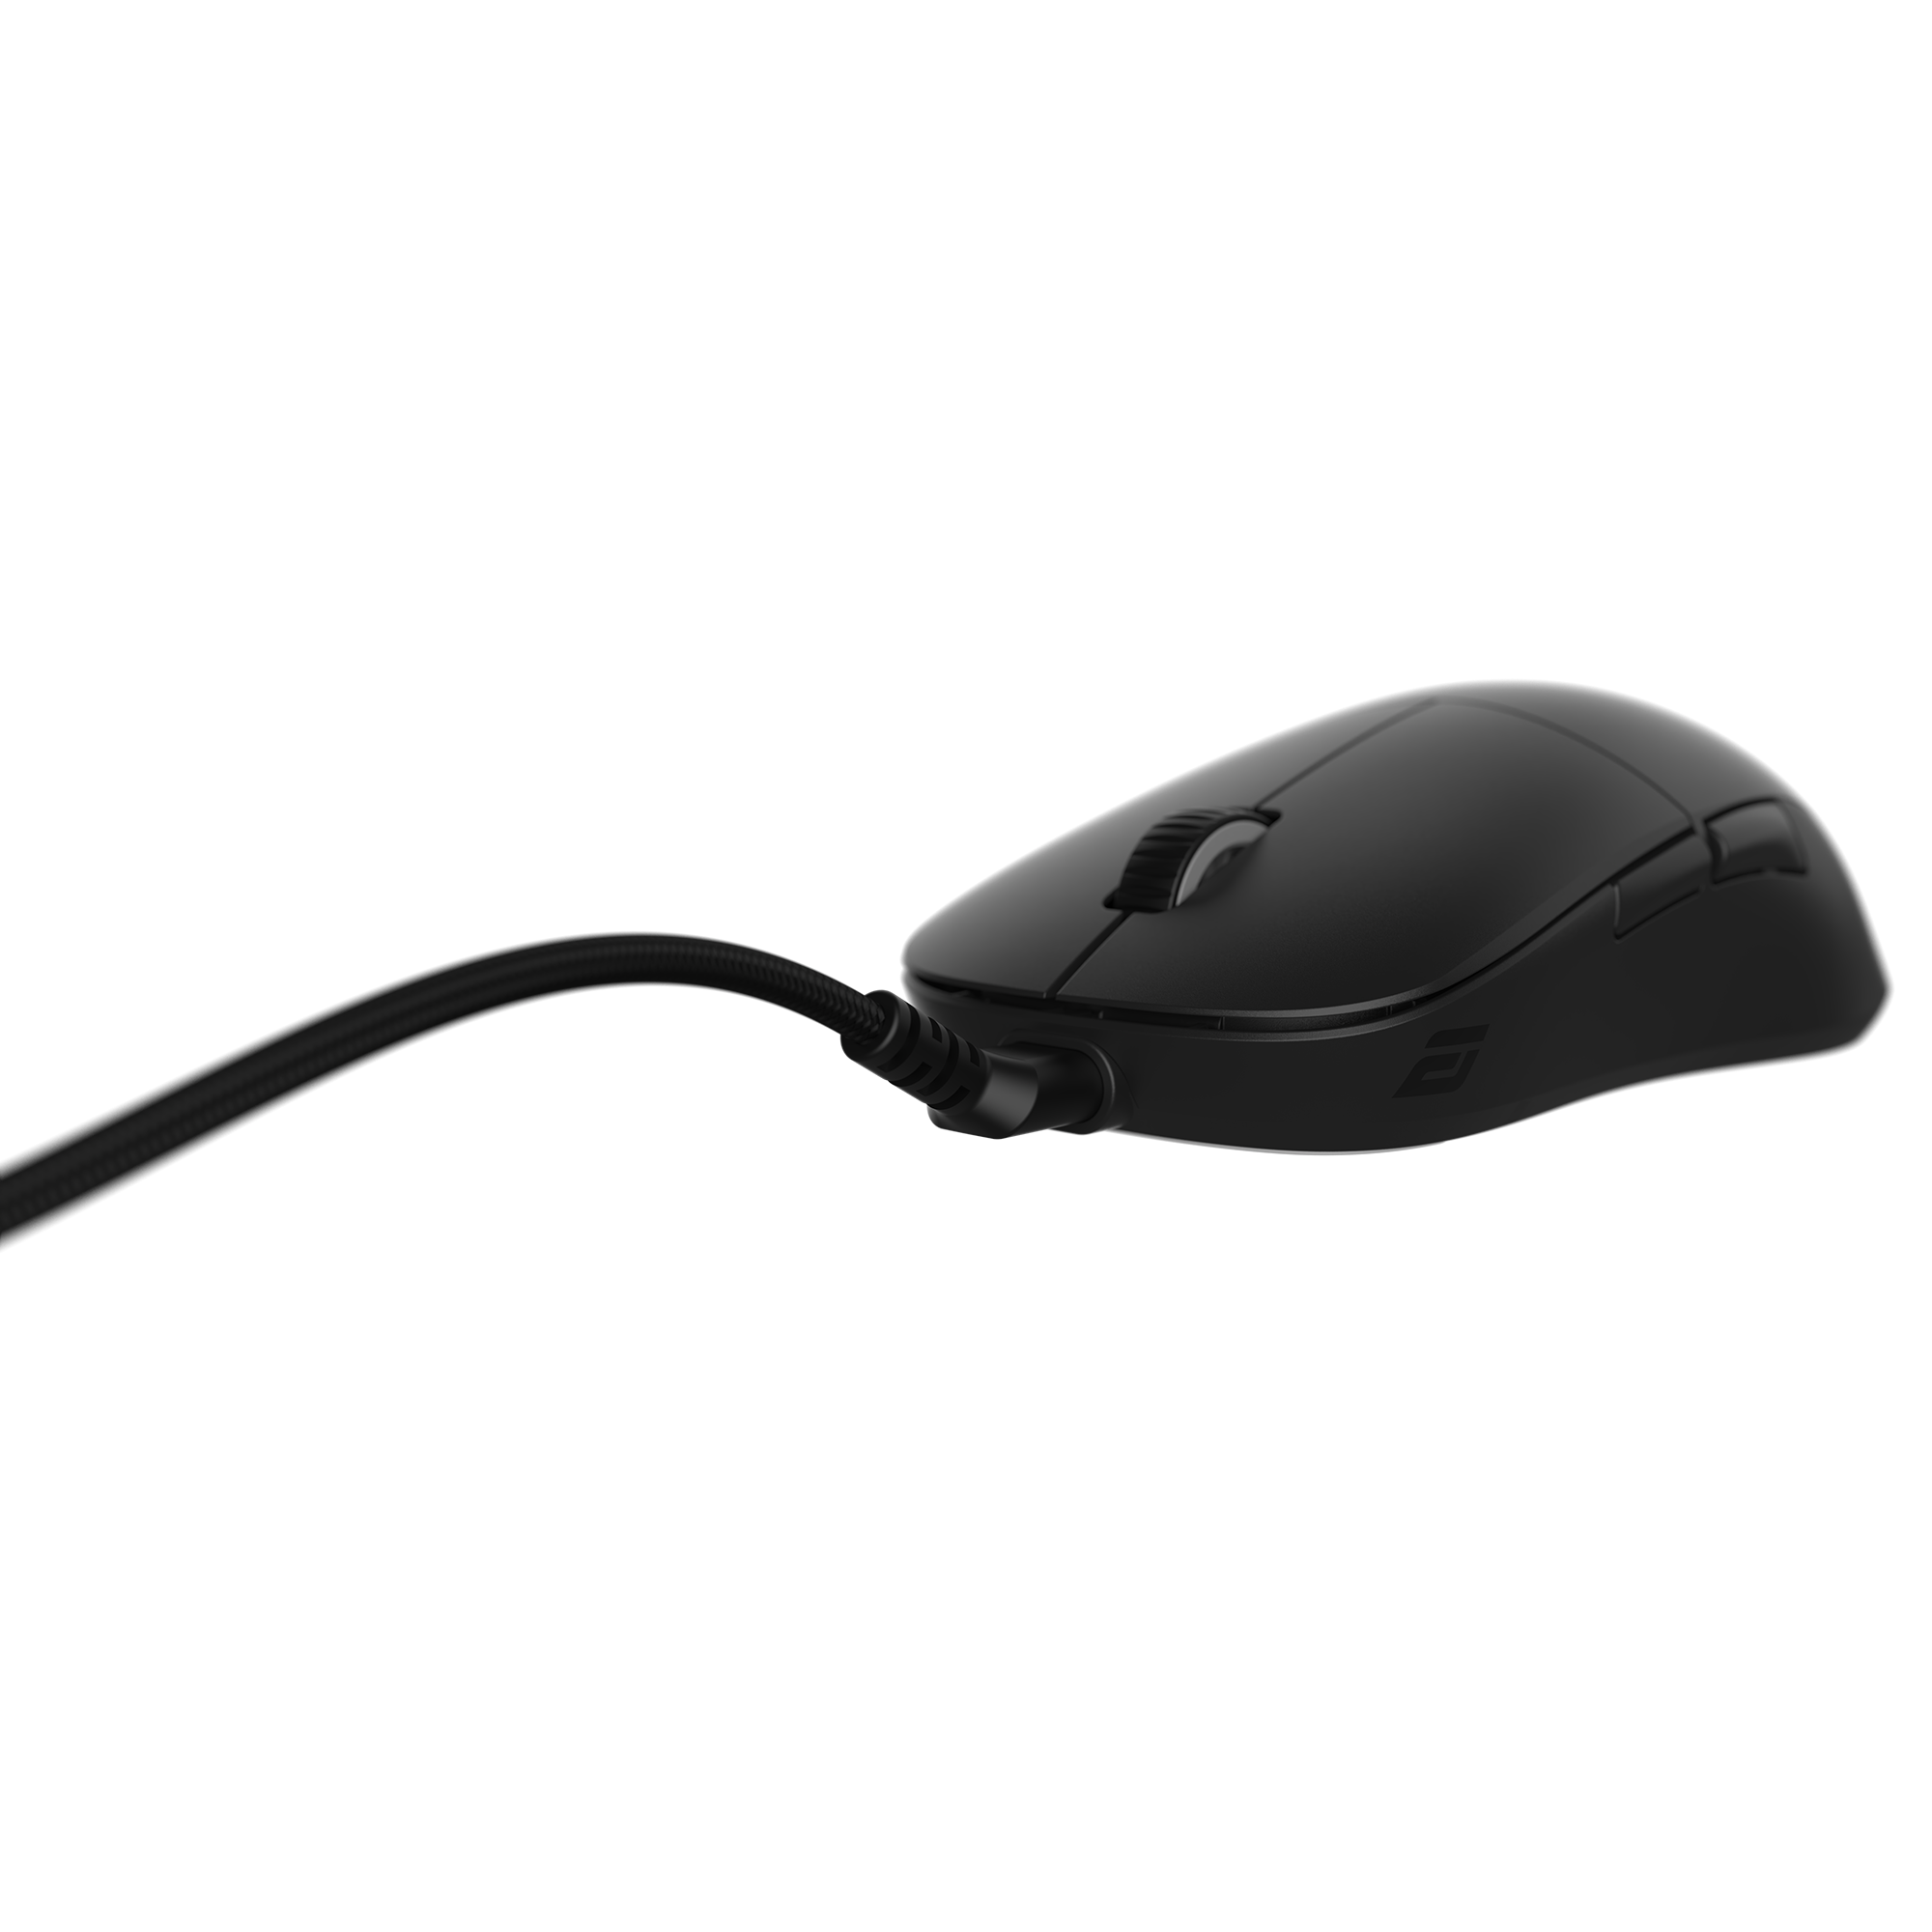 XM2we Wireless Gaming Mouse - black